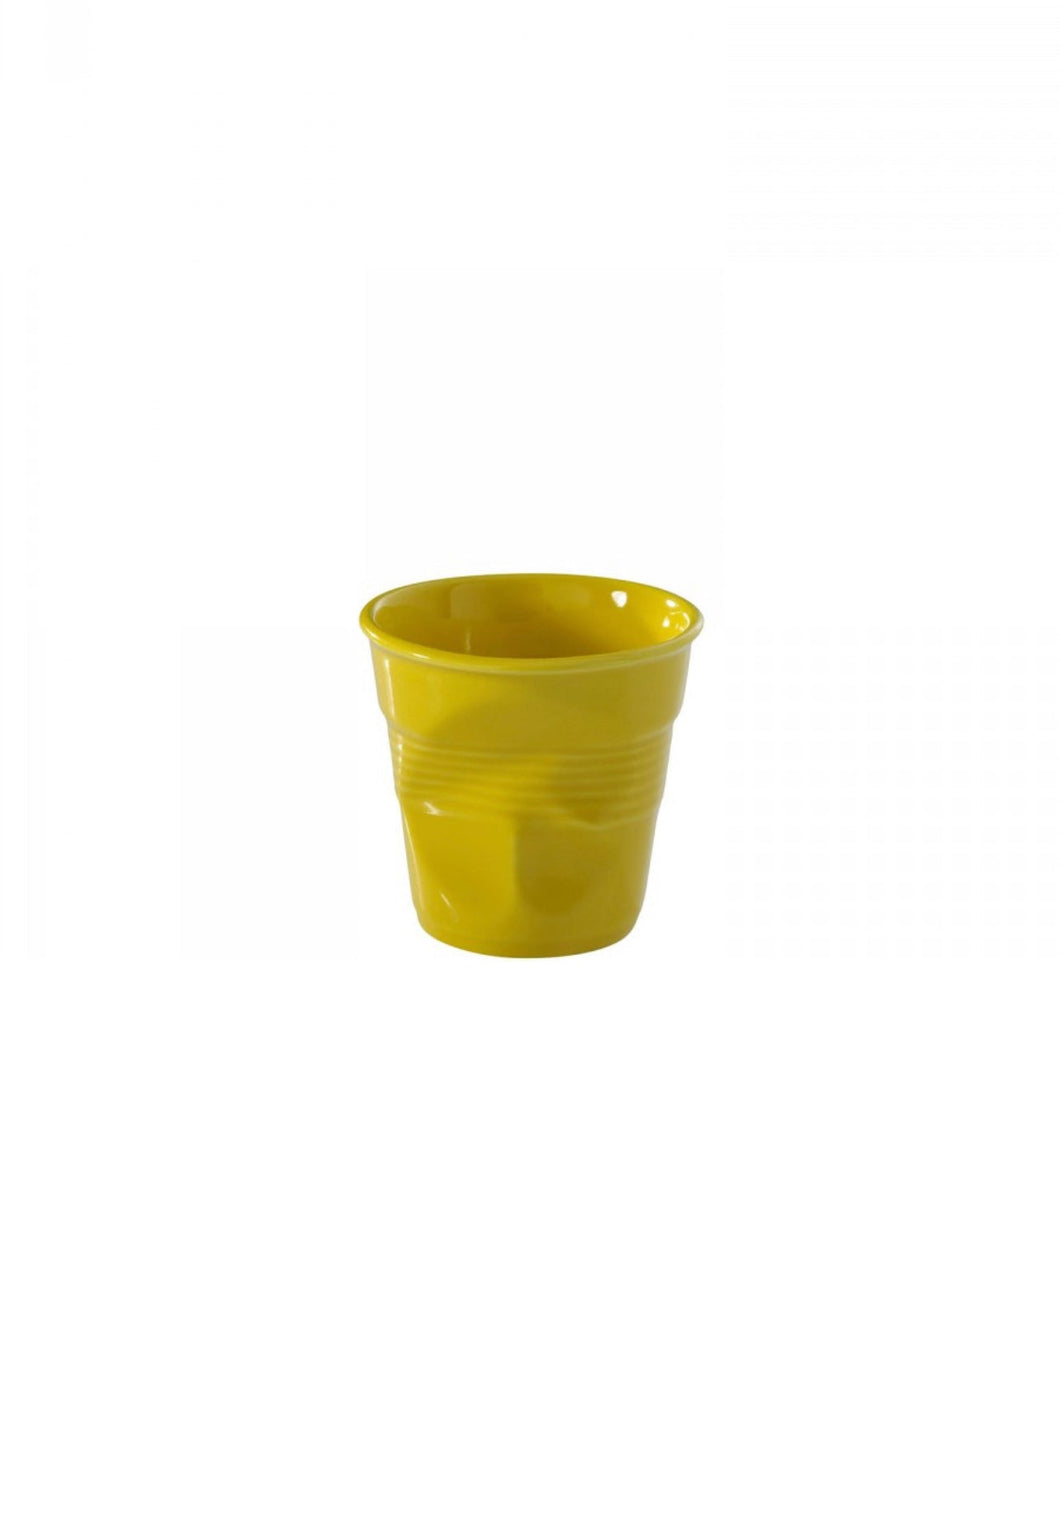 Froisses Expresso Coffee Cup 80ml Set of 6x Seychelles Yellow